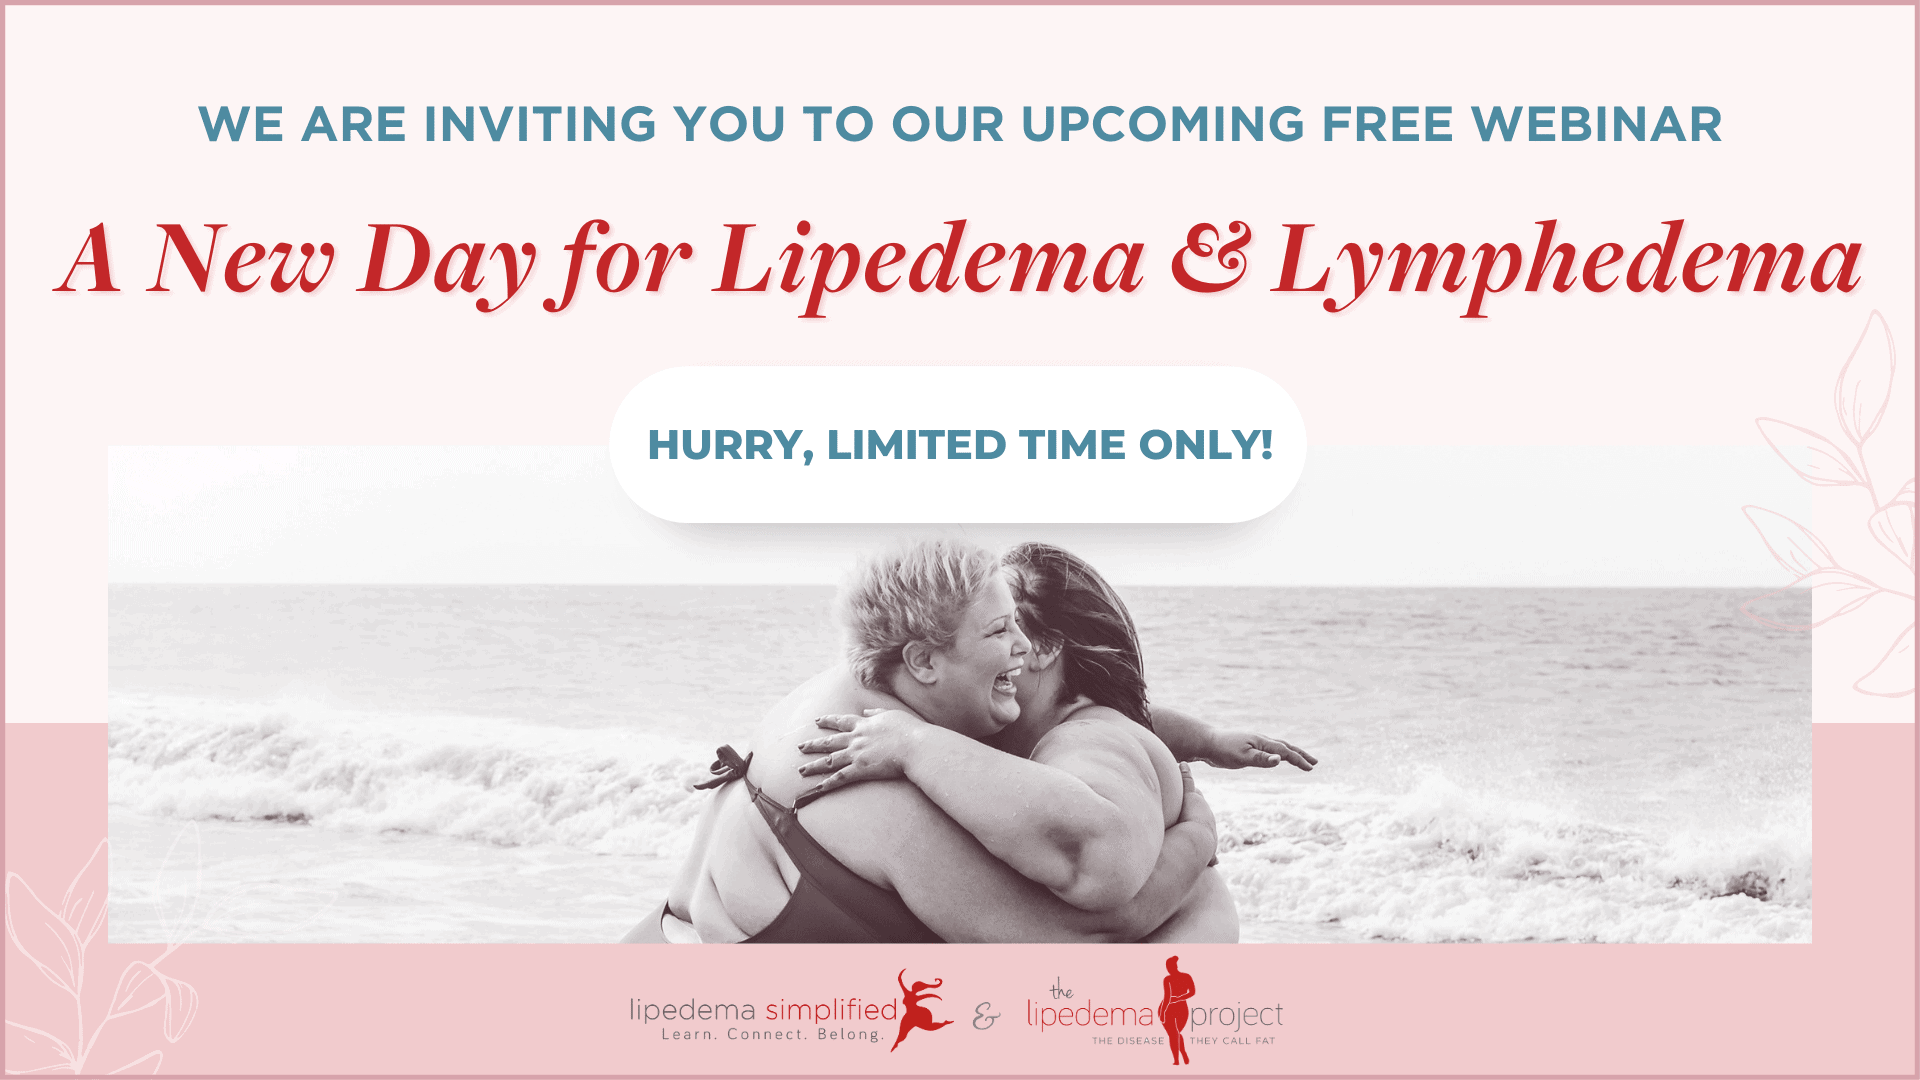 A New Day for Lipedema and Lymphedema Free Webinar